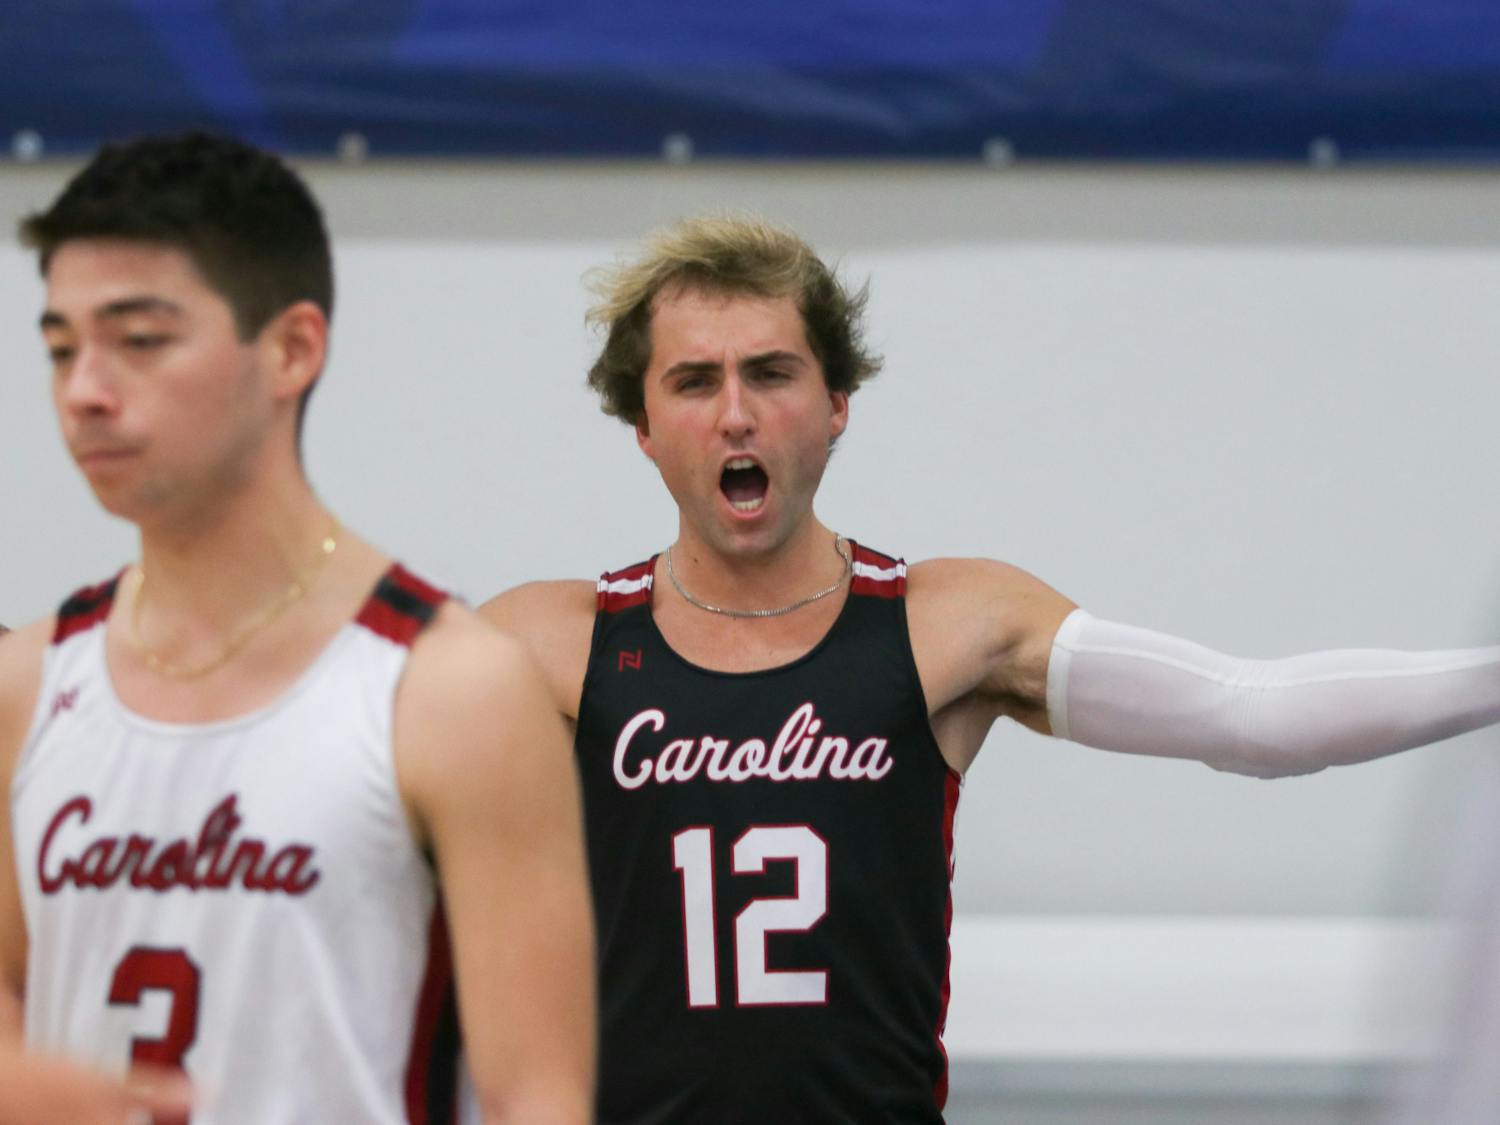 Senior libero Blake Oliver makes his way to his teammates to celebrate a point against College of Charleston A in pool play. CofC A is a regular opponent for the Gamecocks, as they played them in previous tournaments in the Fall 2022 season and past years.&nbsp;